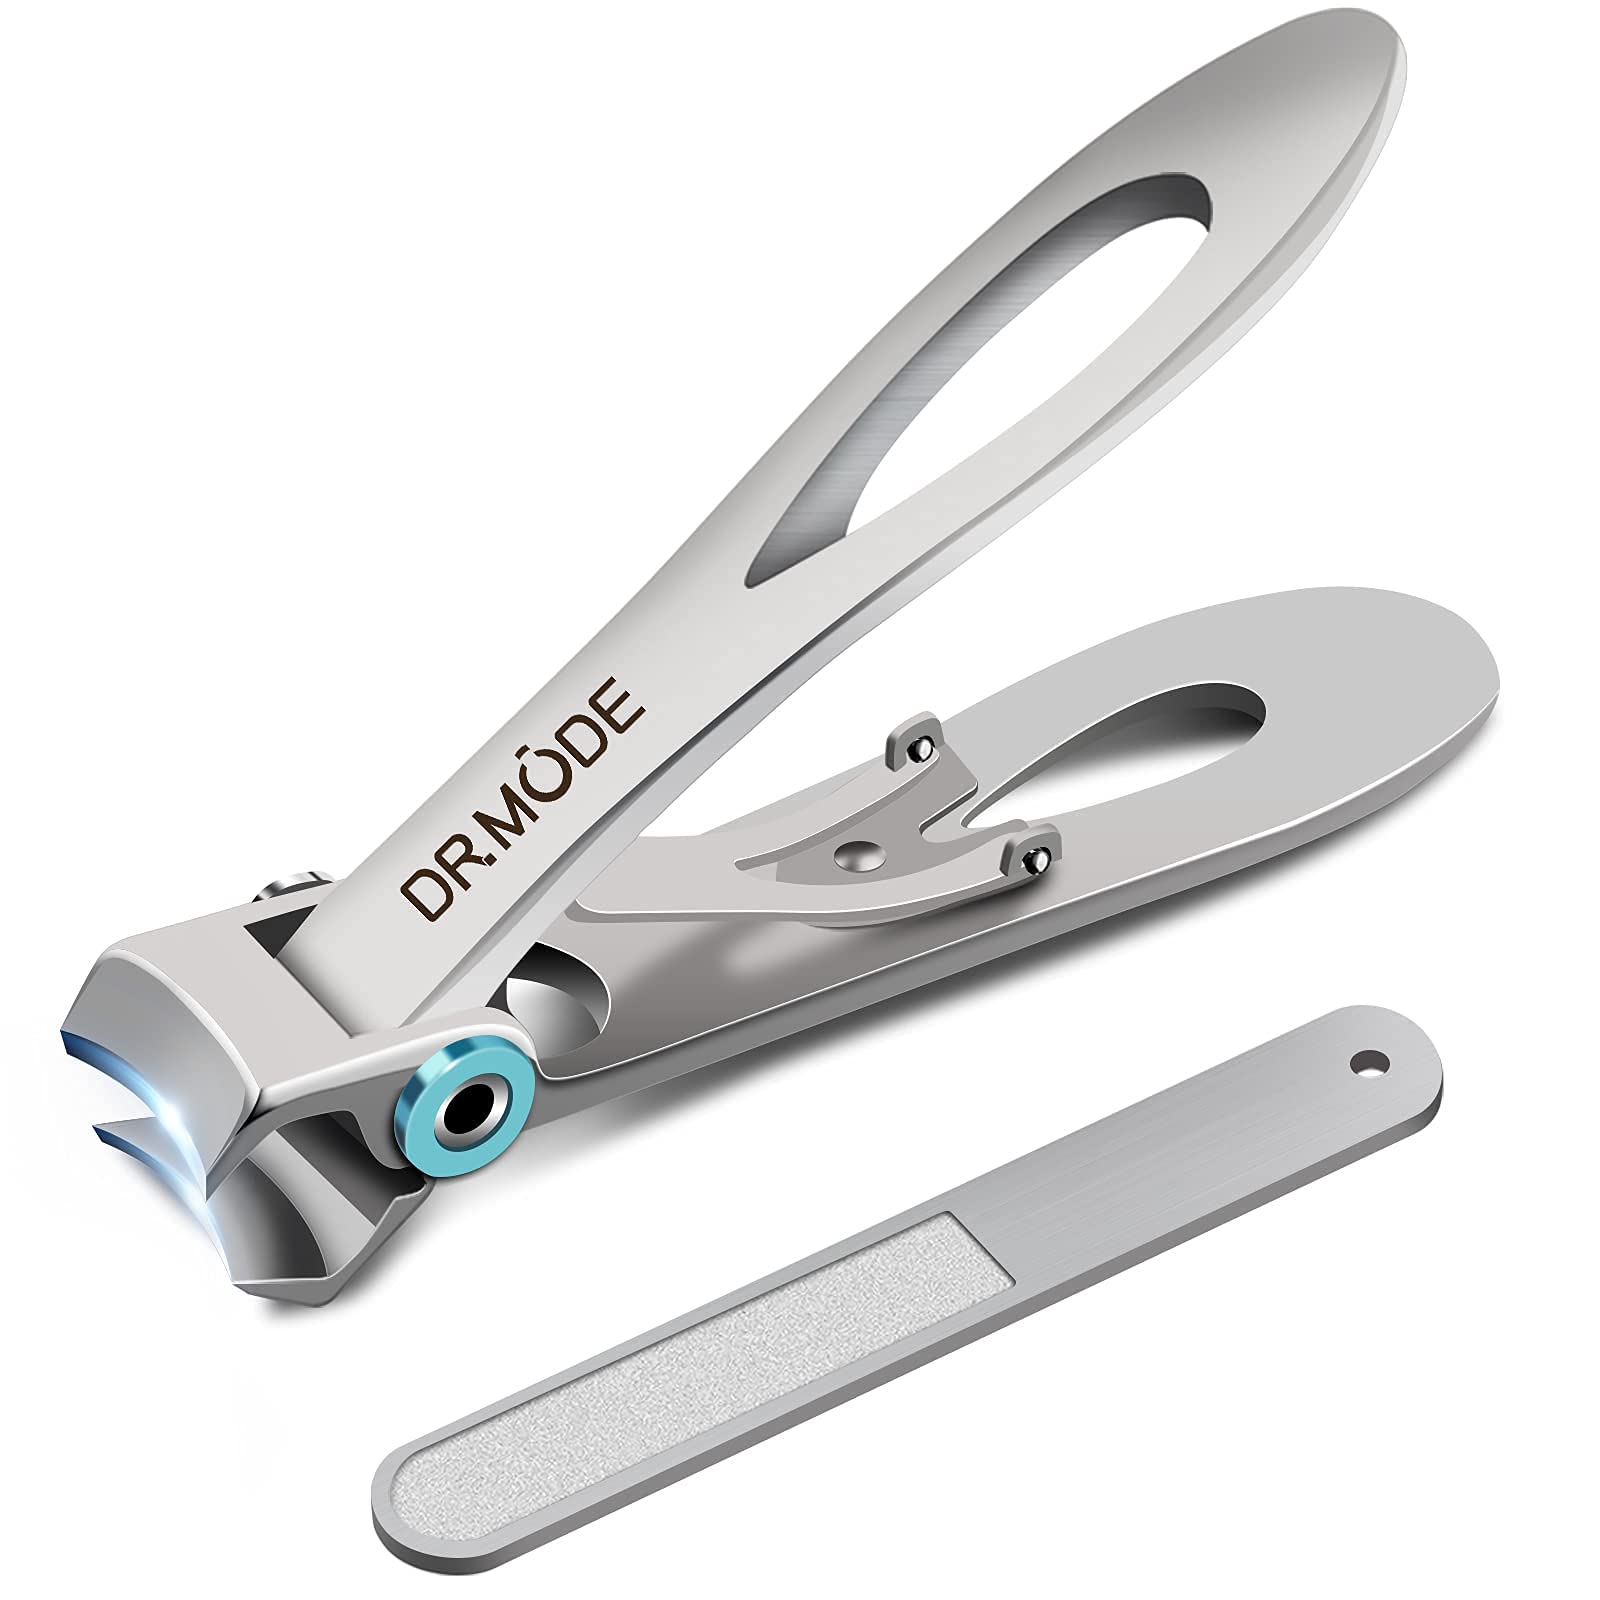  Toenail Clippers for Thick Nails - Heavy Duty